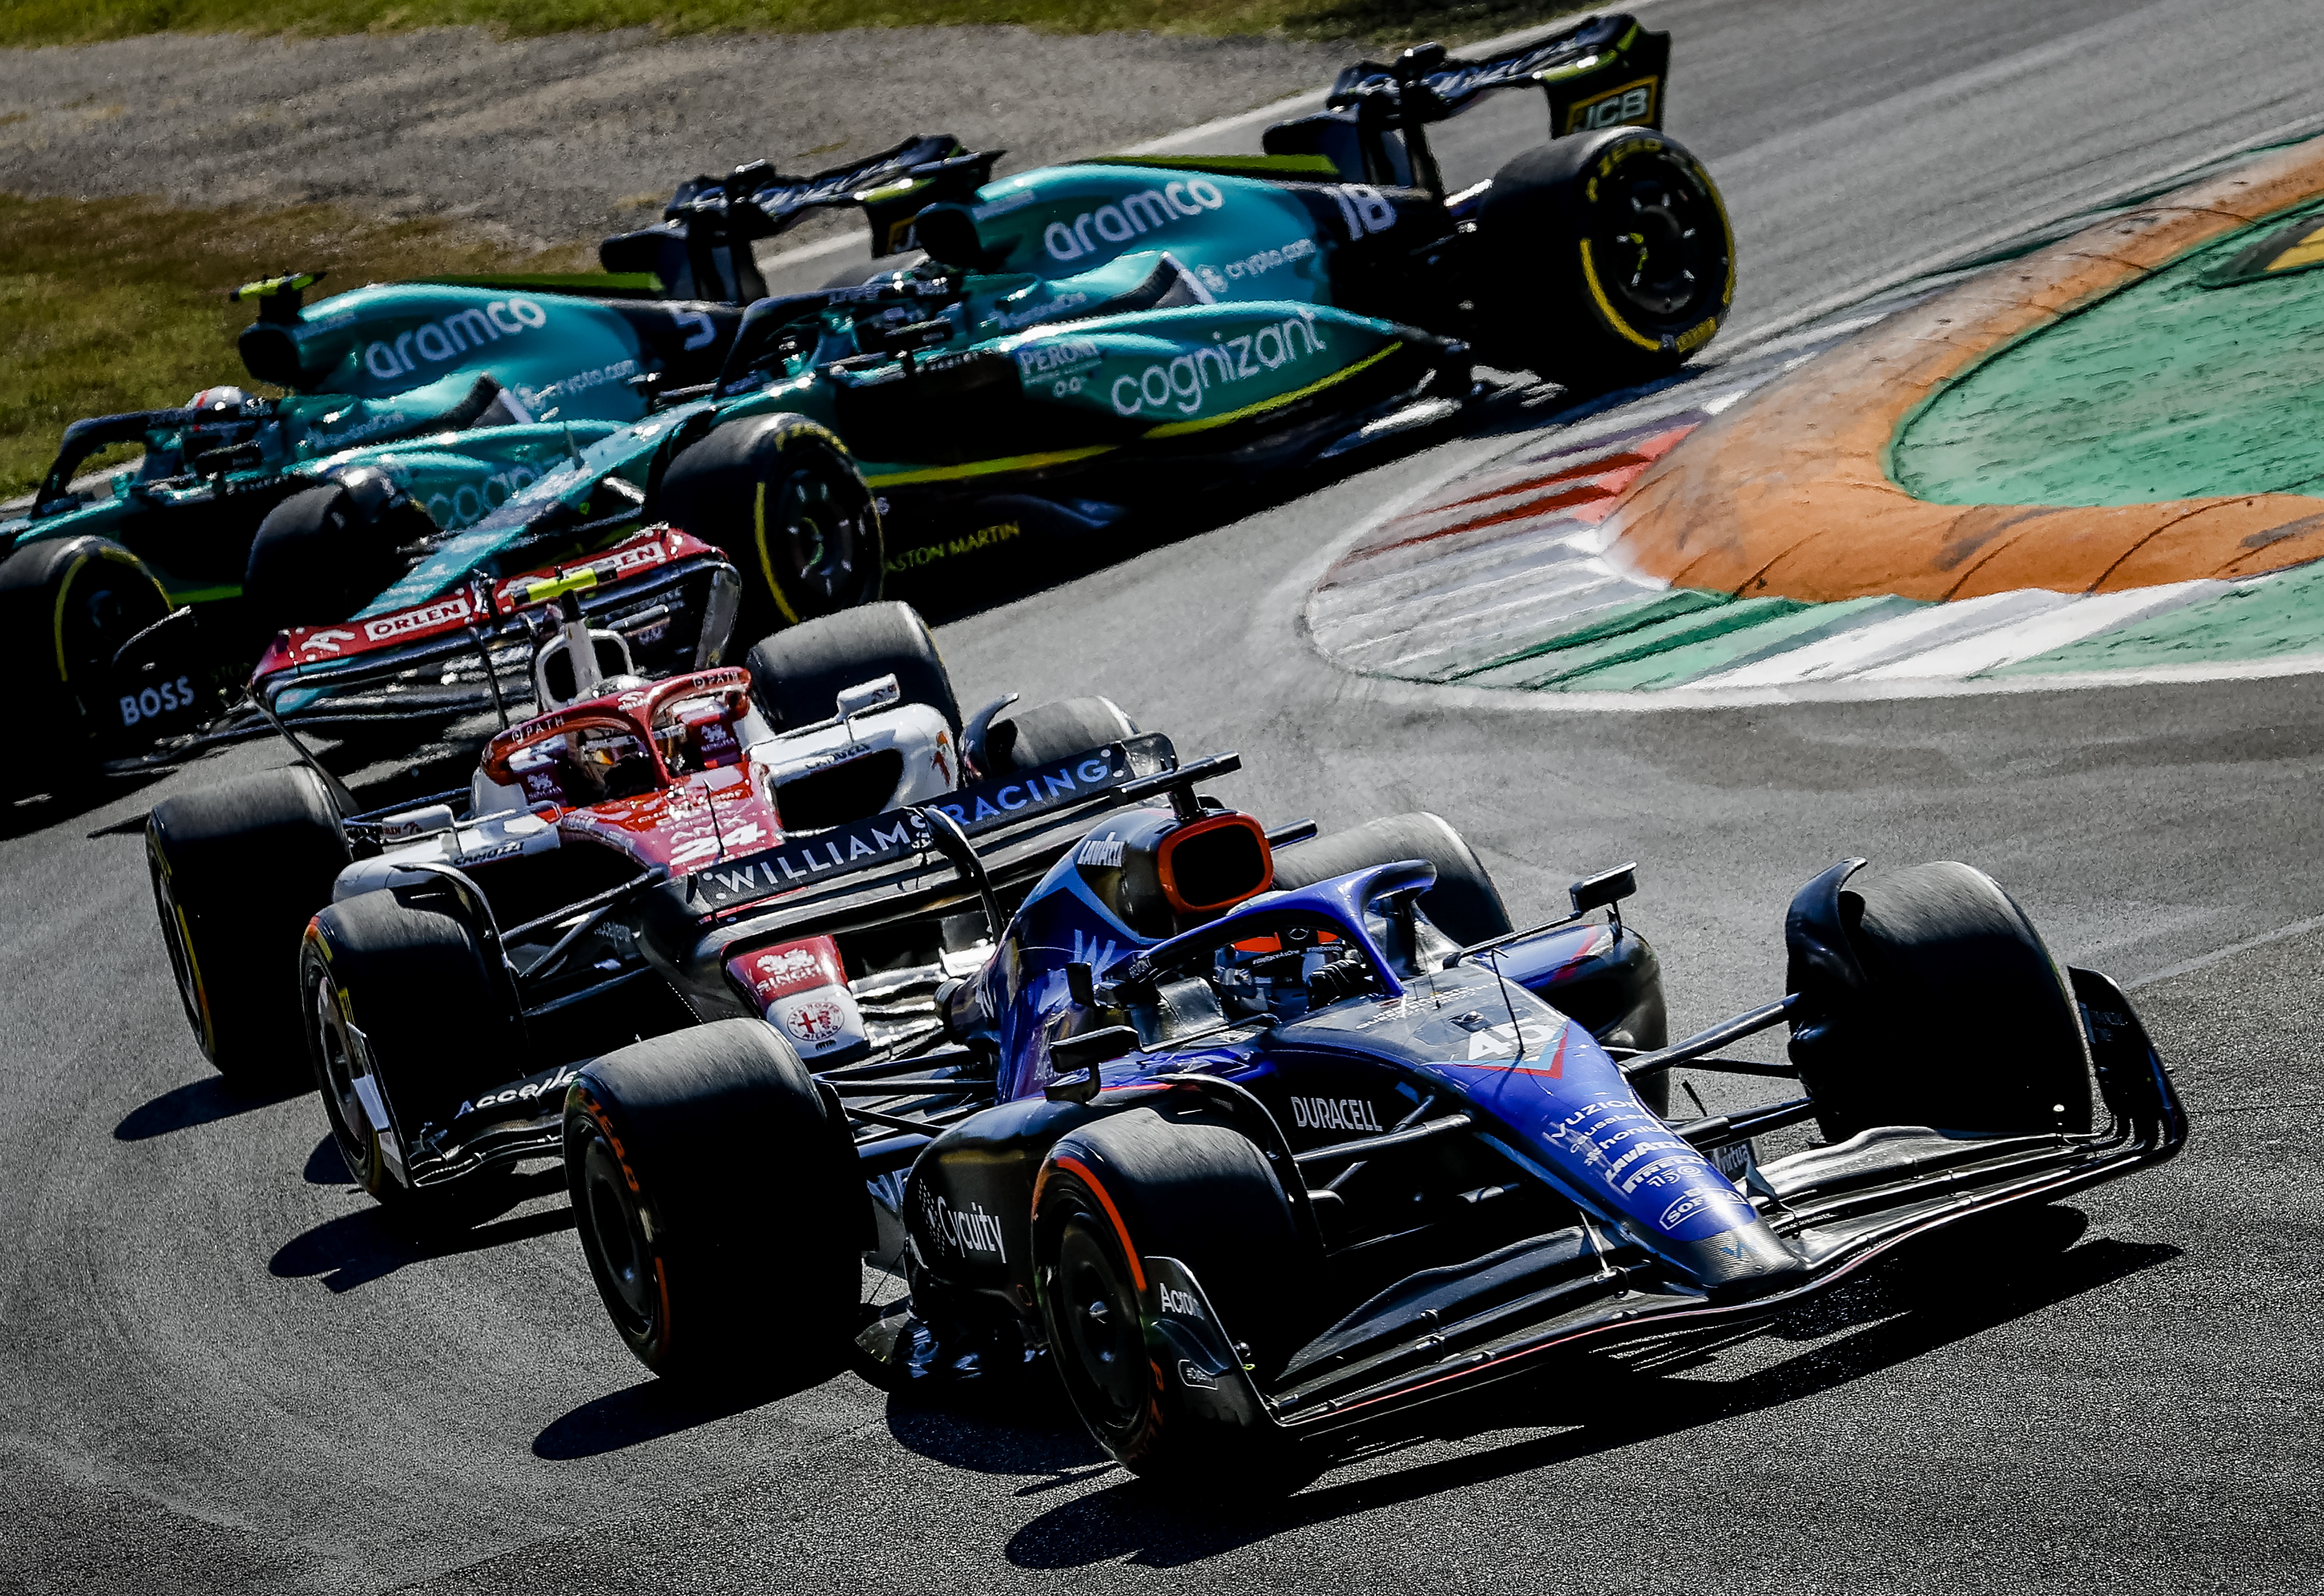 Nyck de Vries (Williams) during the F1 Grand Prix of Italy at the Circuit de Monza in Monza, Italy. REMKO DE WAAL (Photo by ANP via Getty Images)